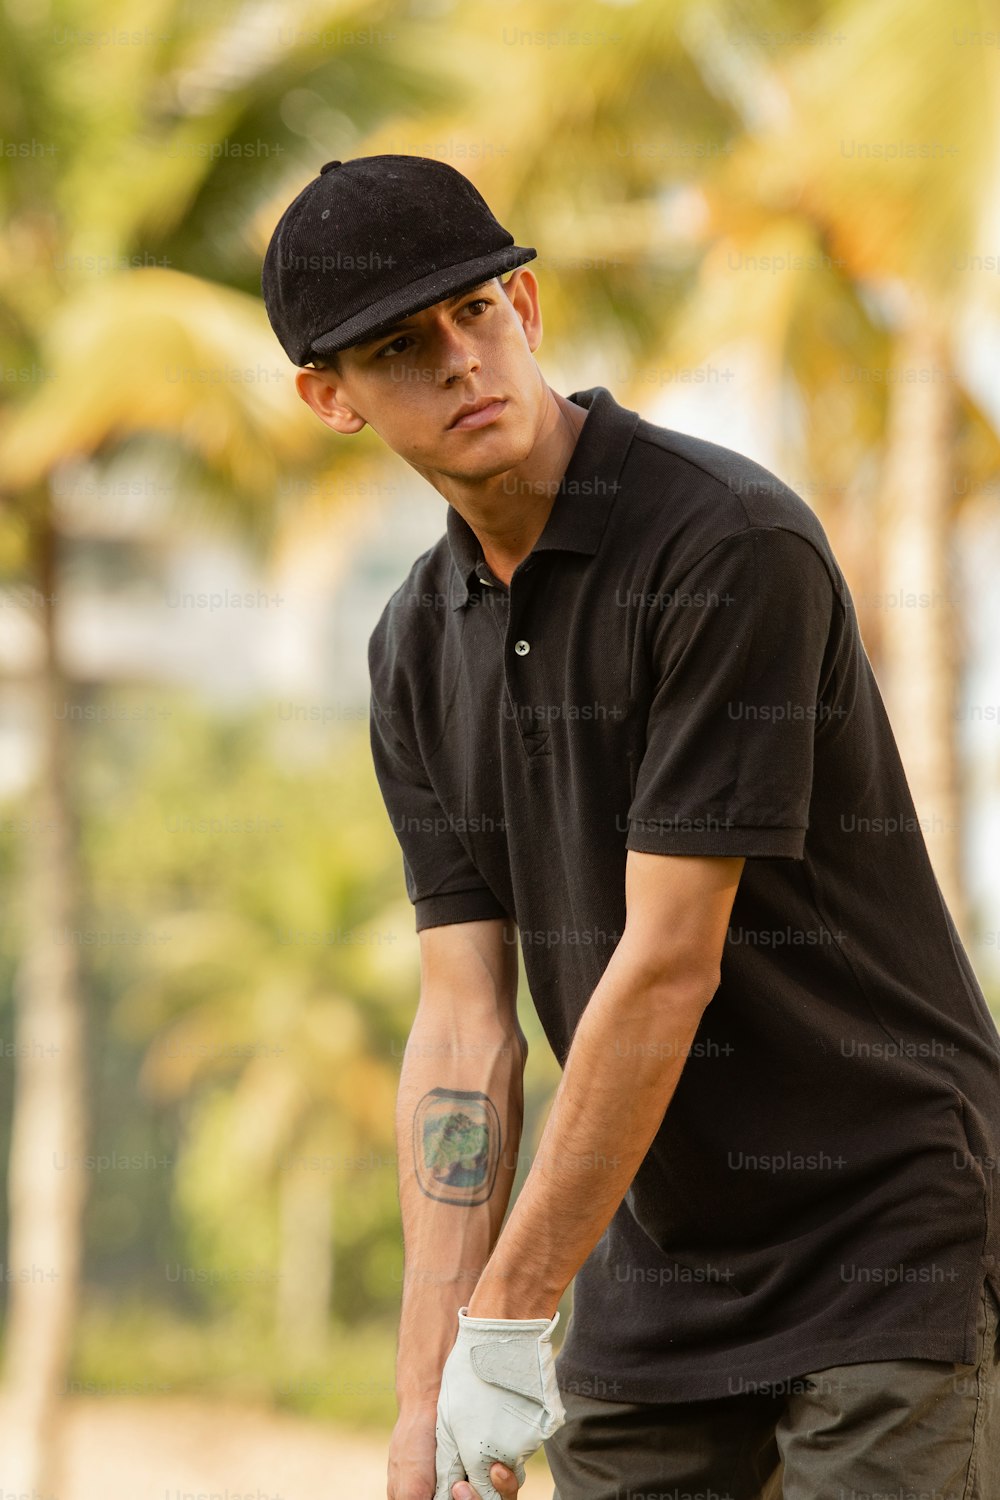 a man in a black shirt and hat holding a skateboard